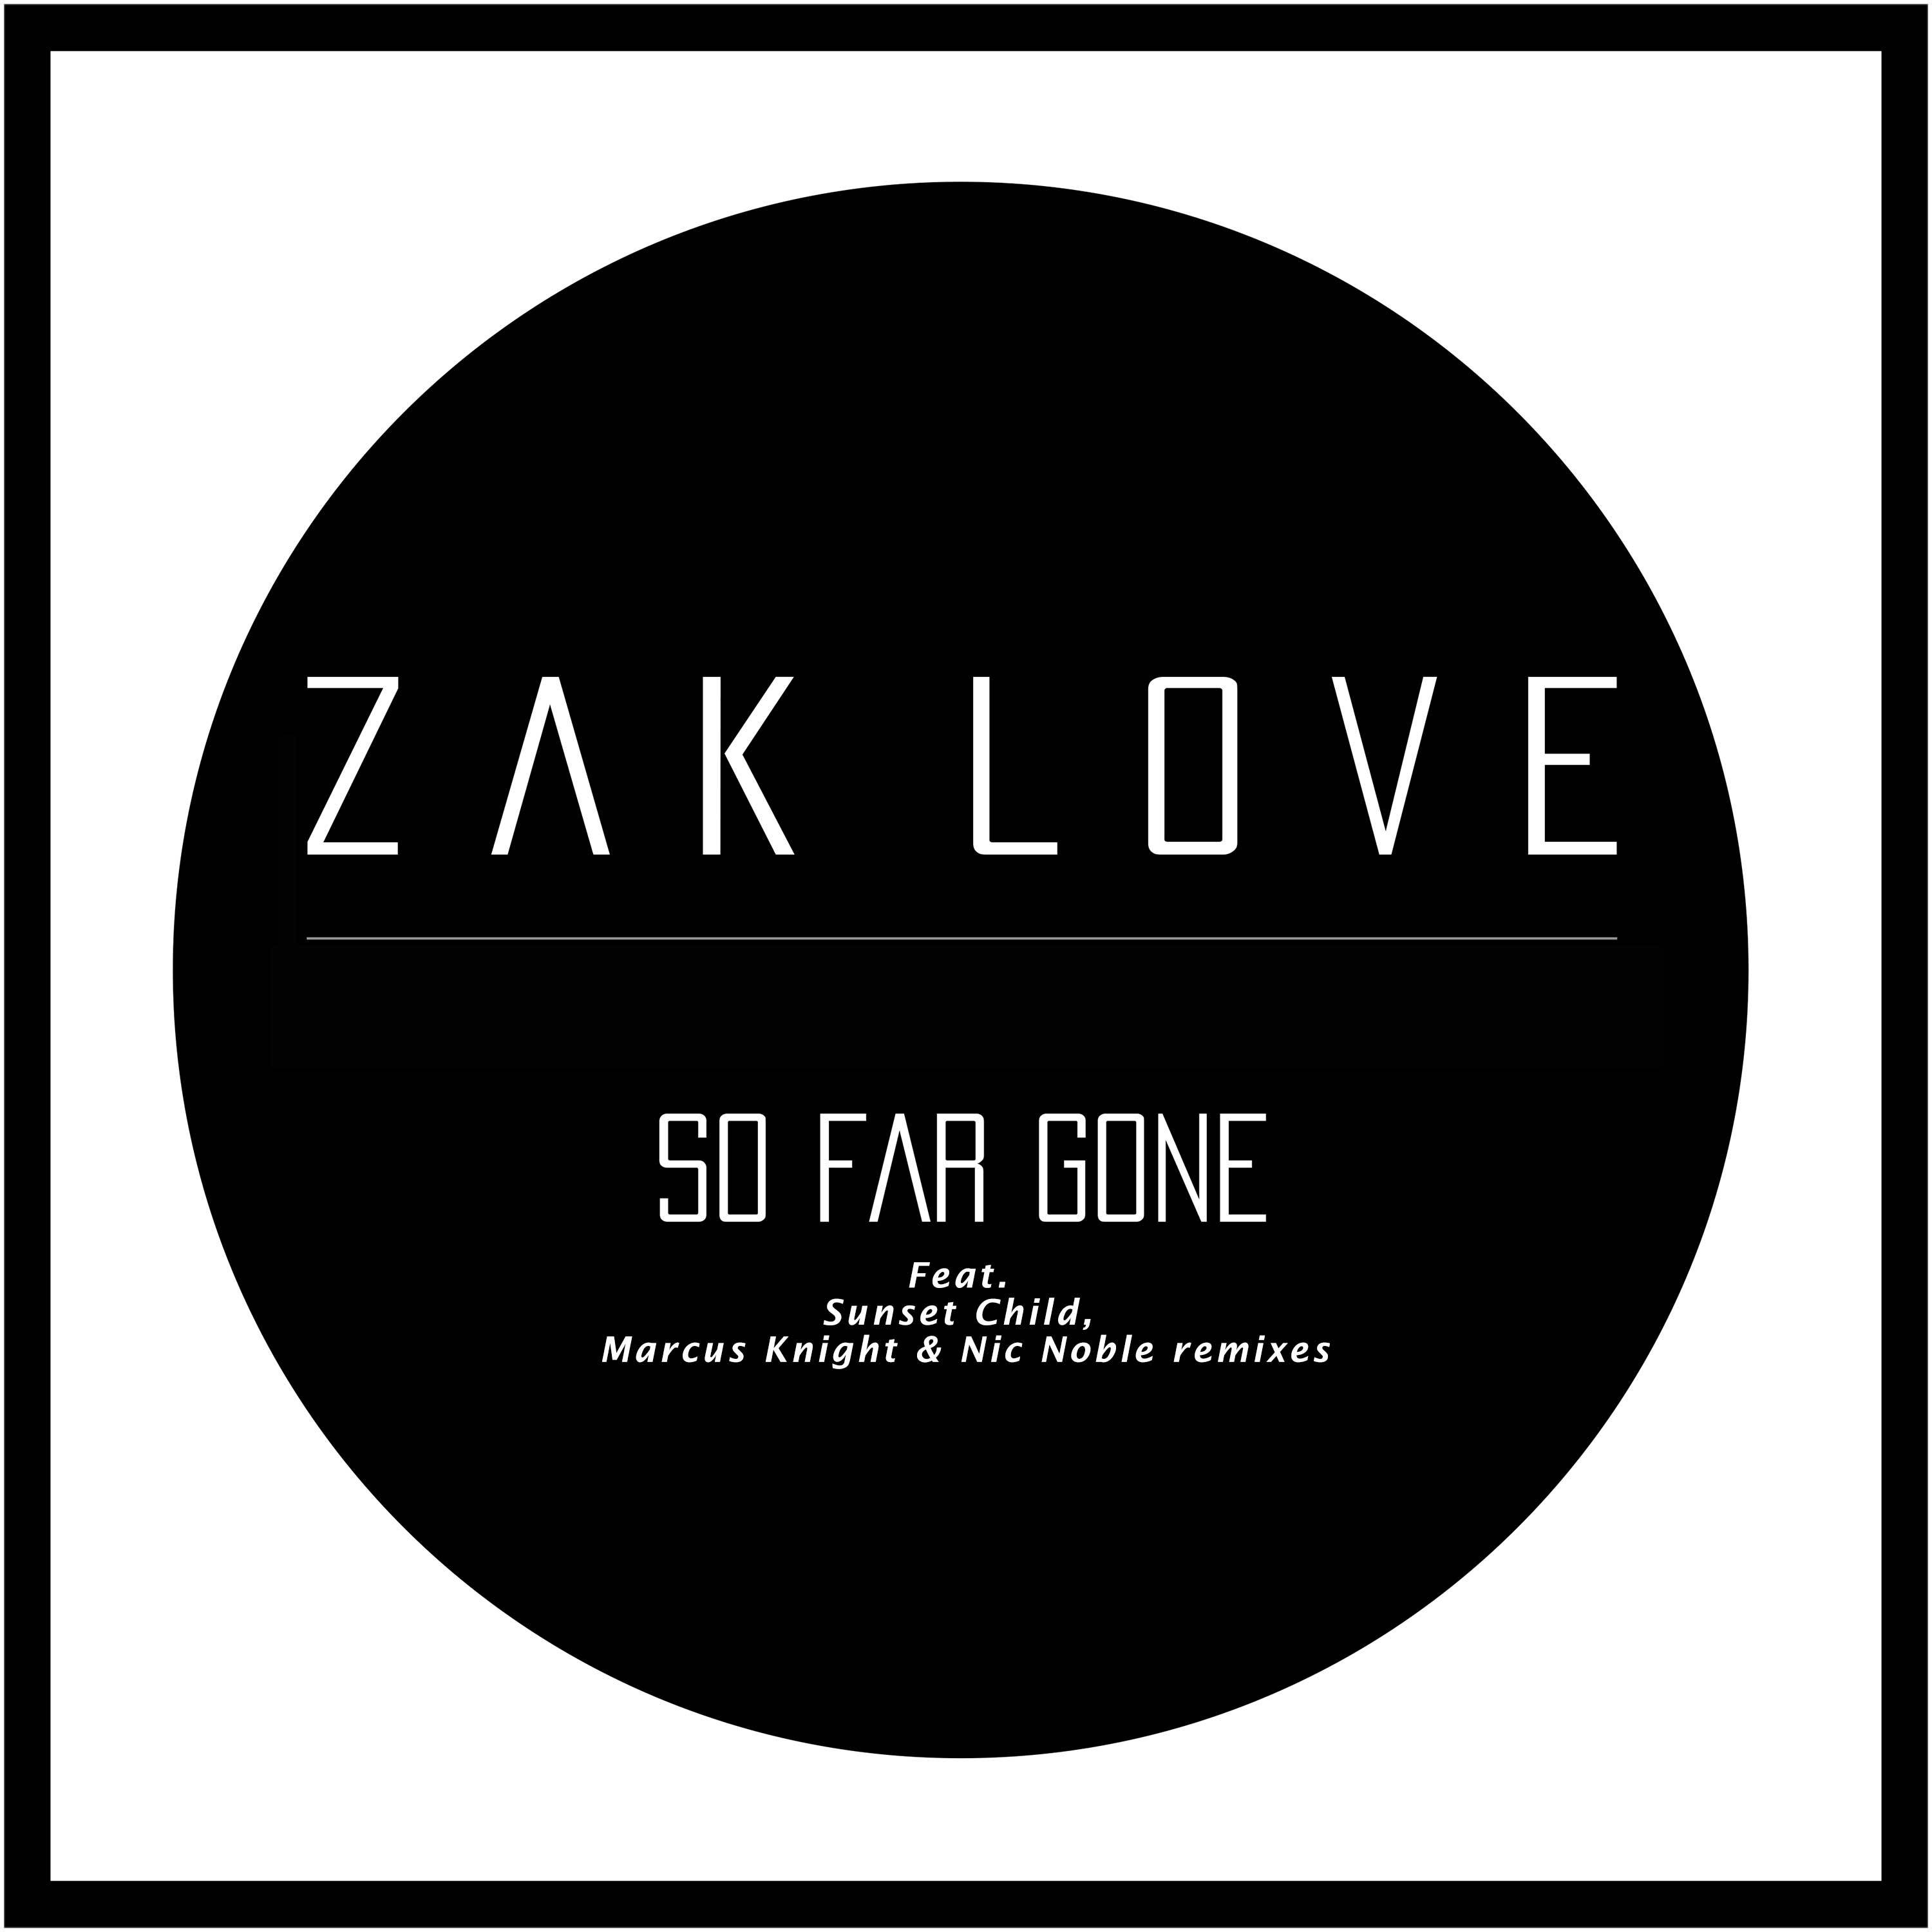 So Far Gone (Marcus Knight & Nic Noble  Remix)